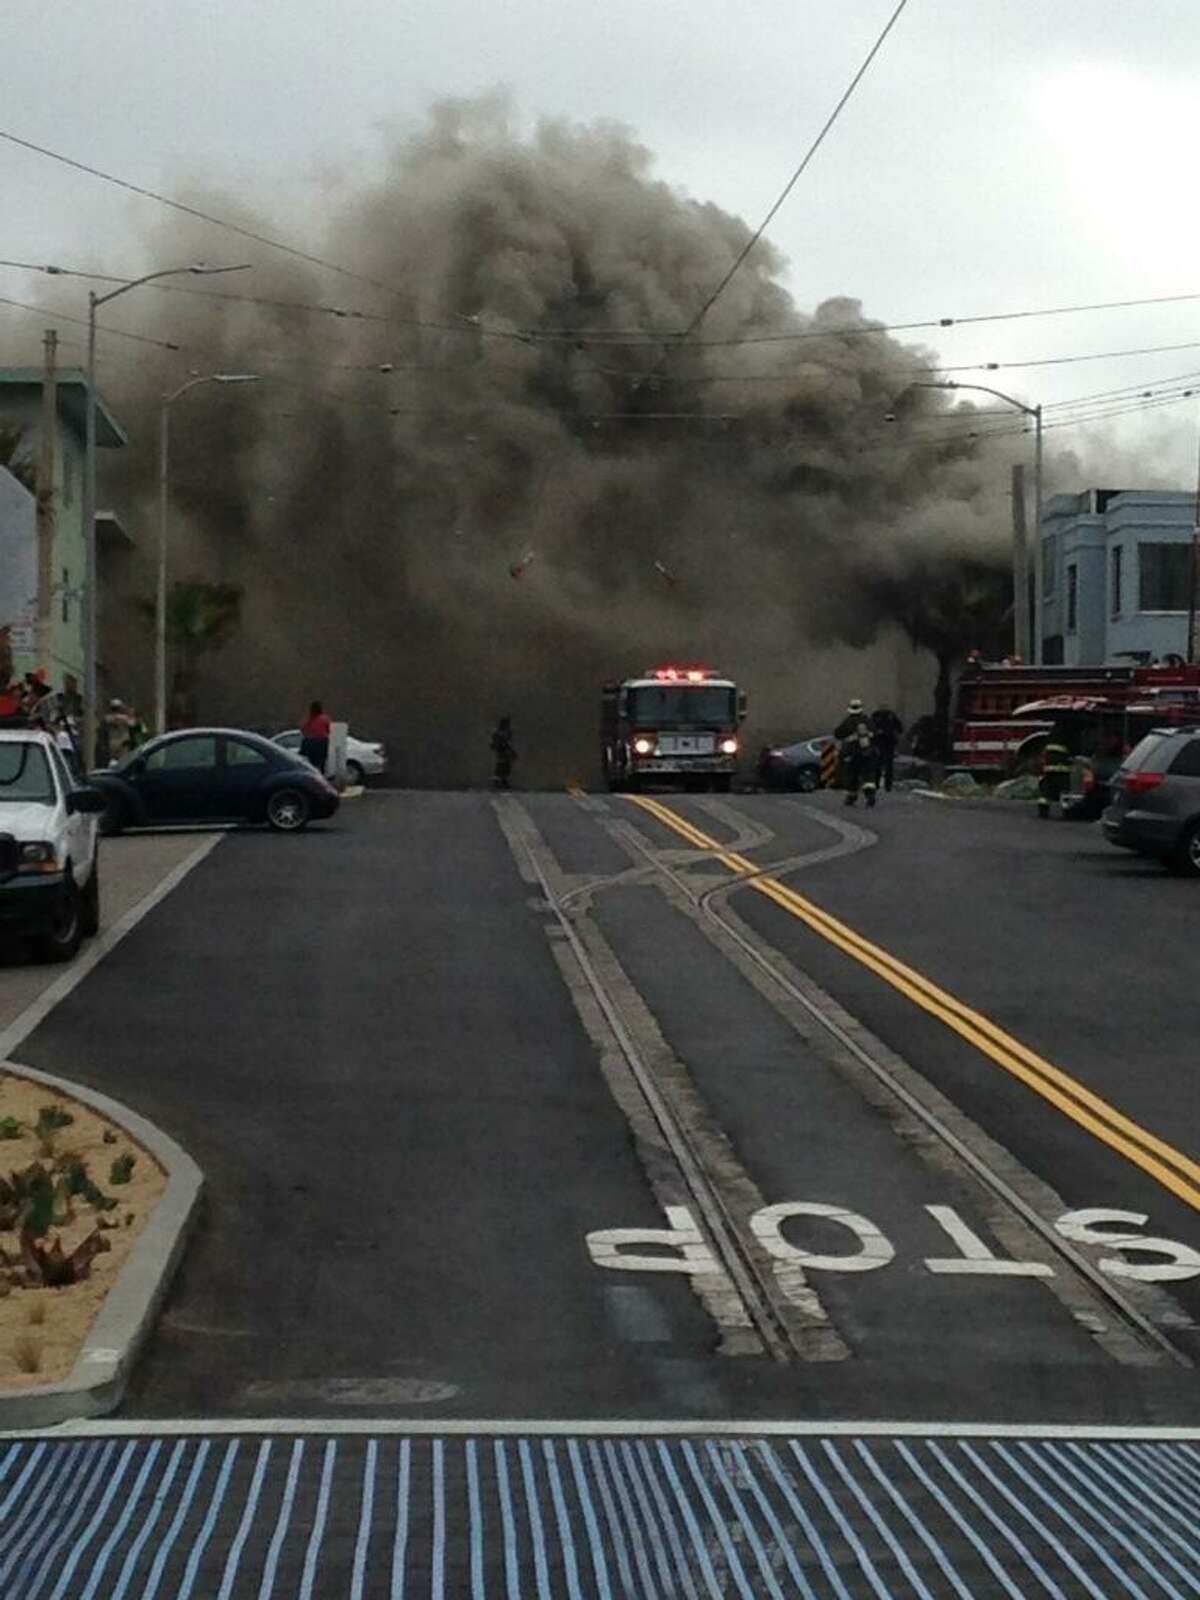 A two-alarm fire broke out at 3633 Taraval St. in San Francisco on August 18, 2015.